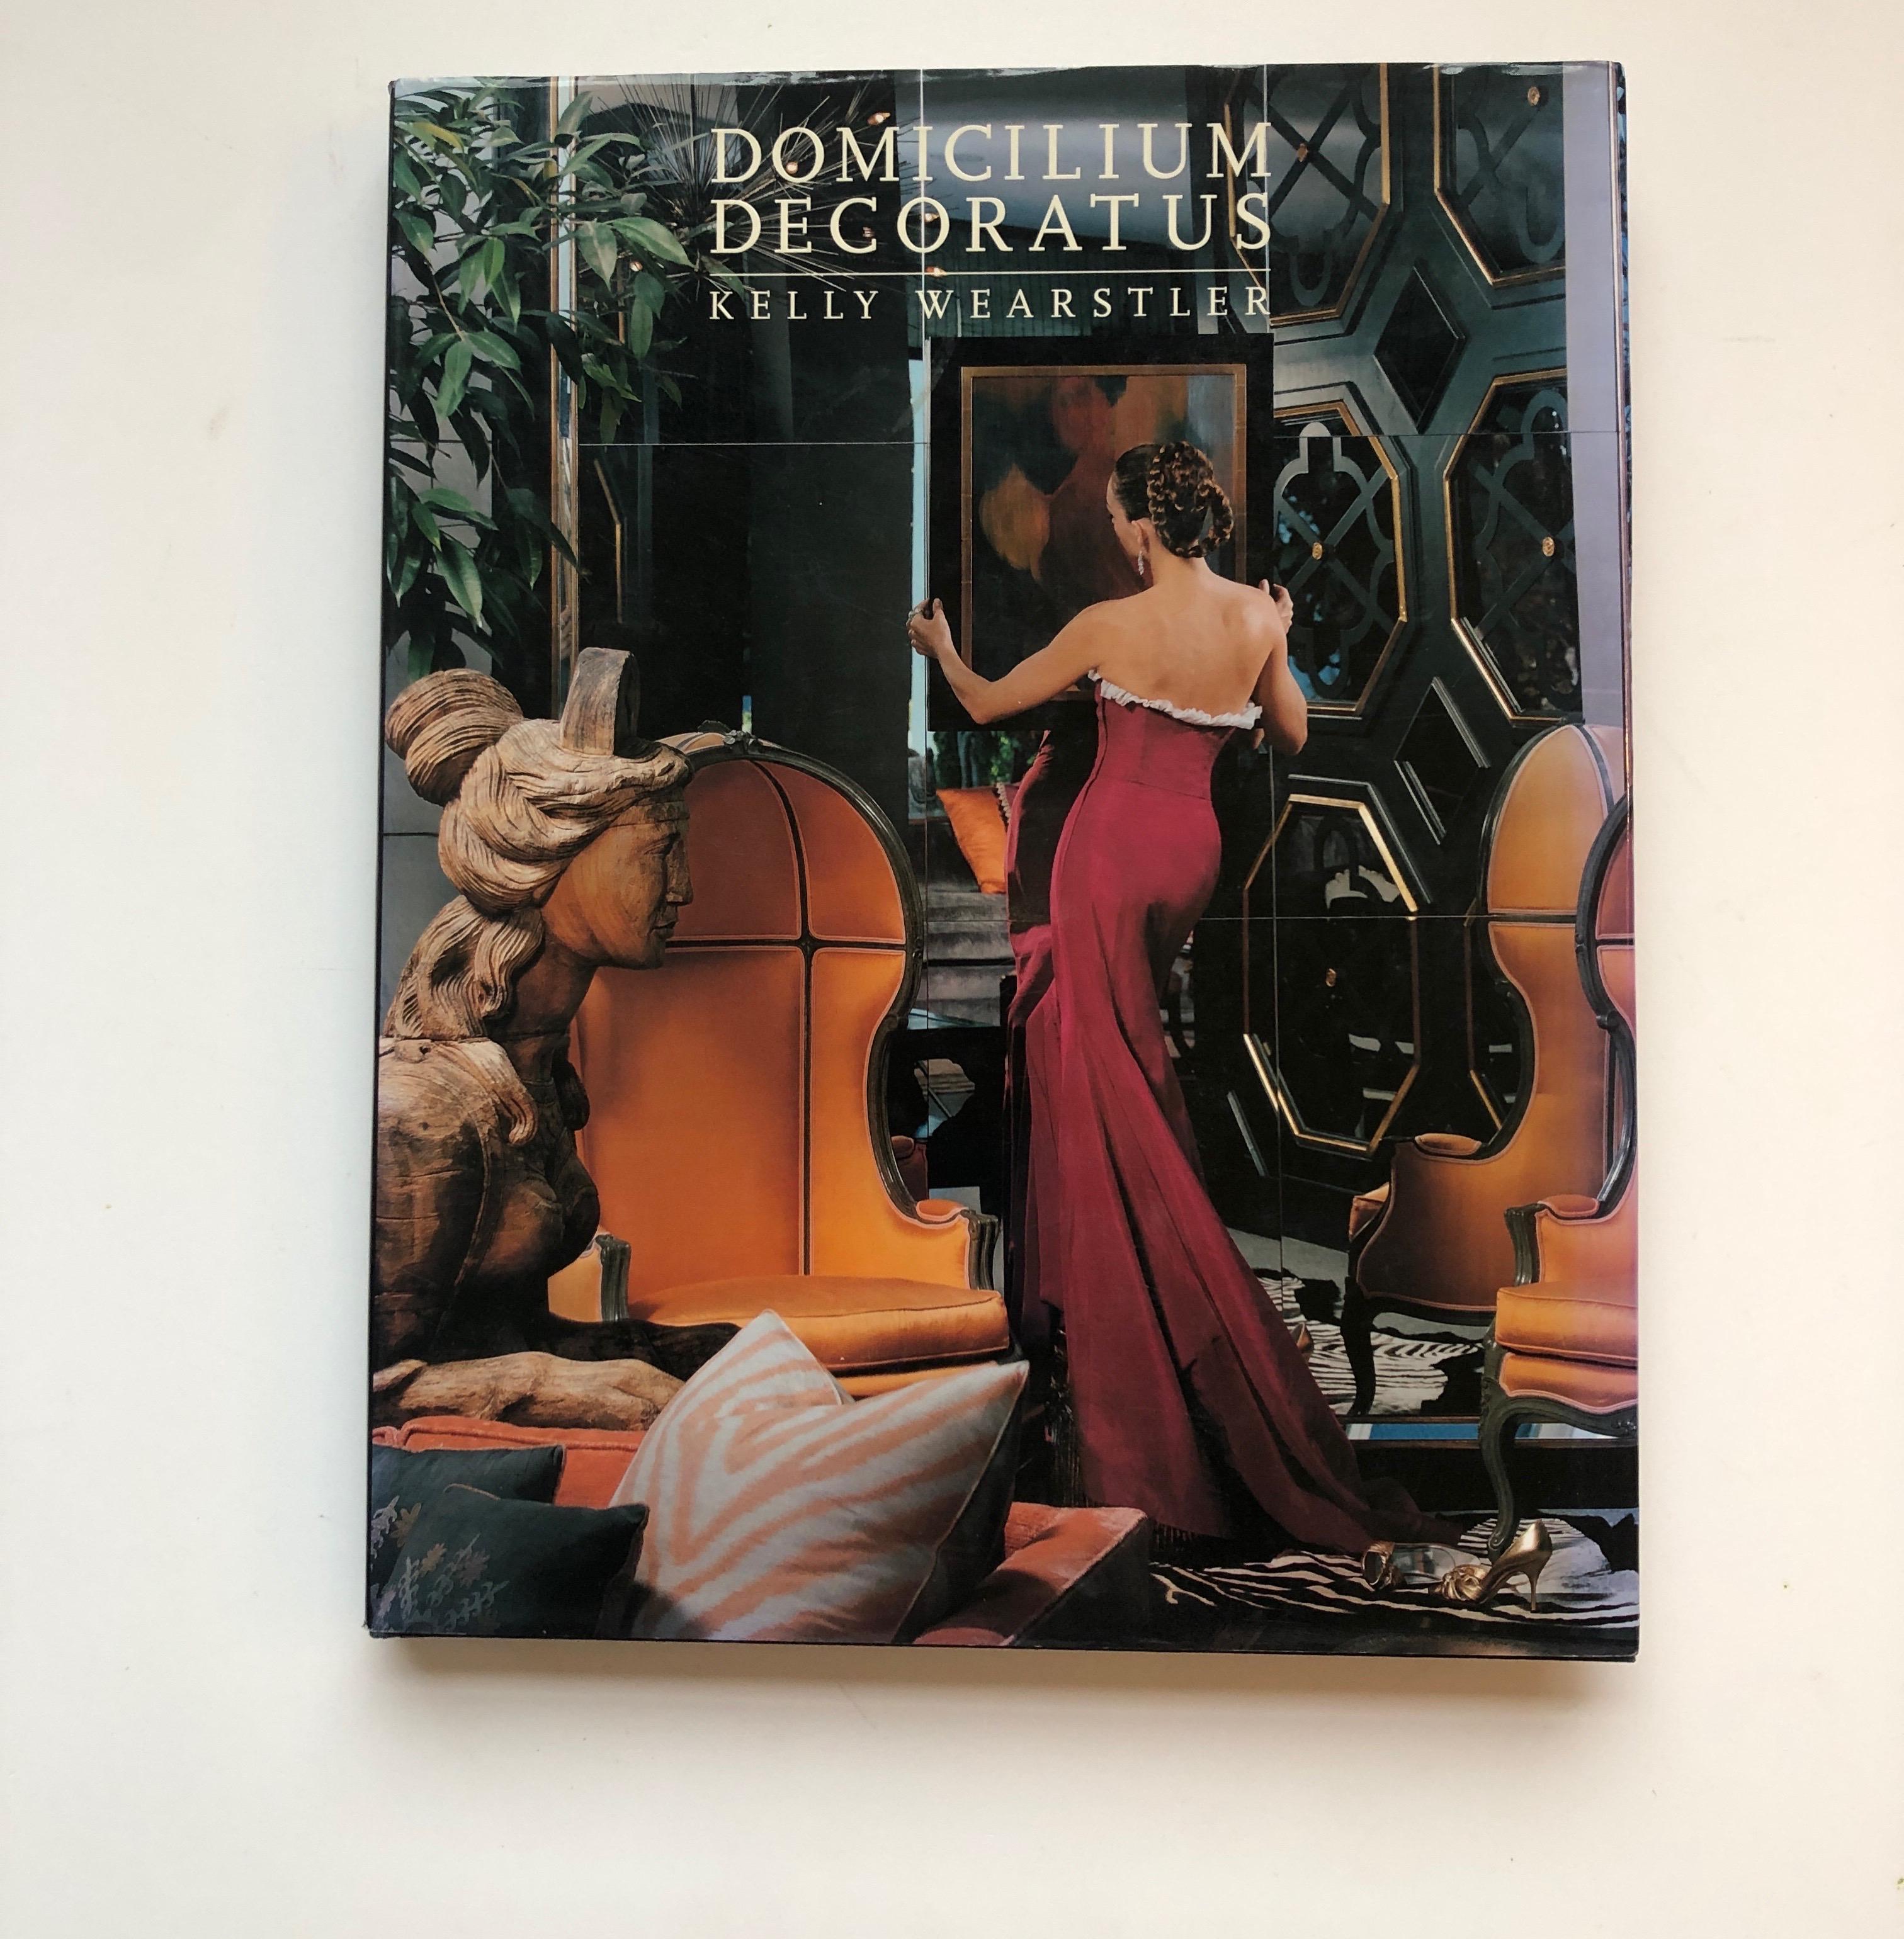 Domicilium Decoratus Decorative Book by K. Wearstler
An acclaimed interior designer and author of the Los Angeles Times bestseller Modern Glamour, Kelly Wearstler presents sumptuous photographs of one of her most incredible design achievements yet